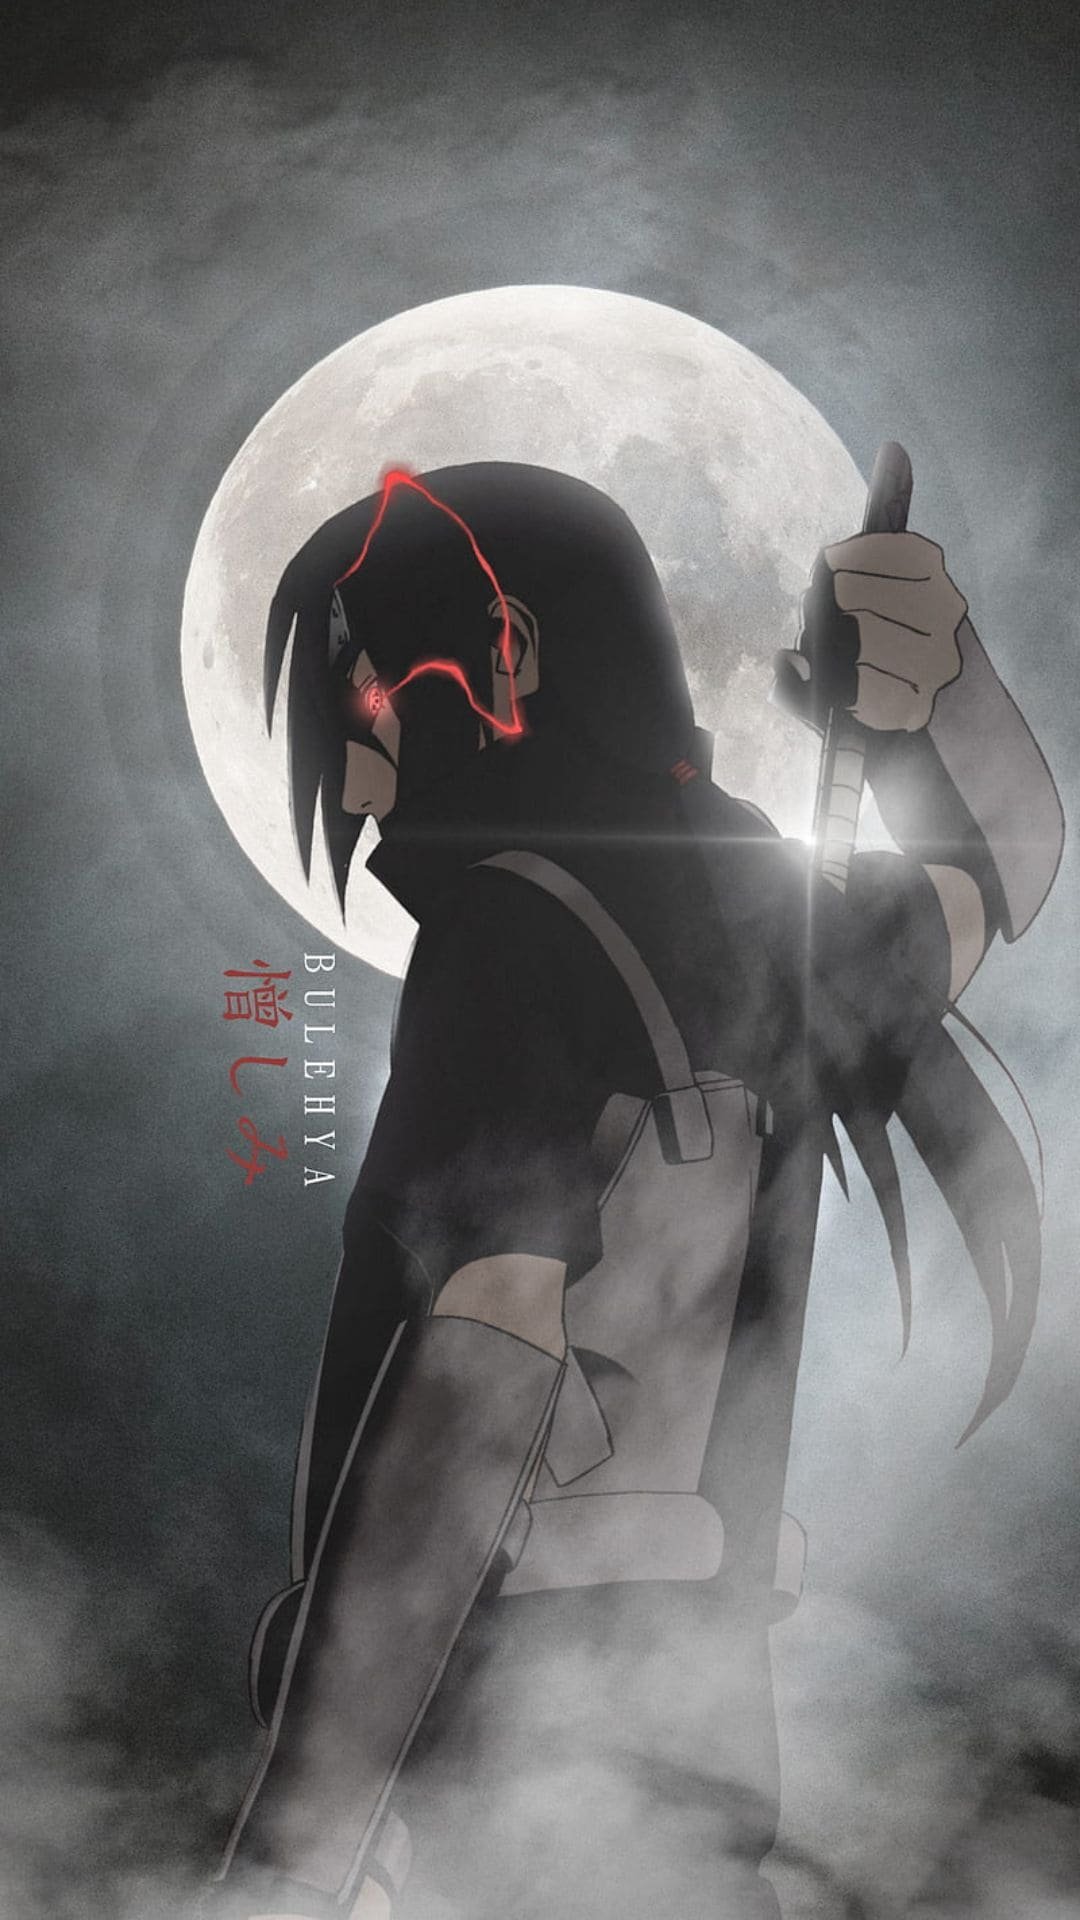 4K Moon iTachi Wallpaper for iPhone Backgrounds from Naruto anime 10